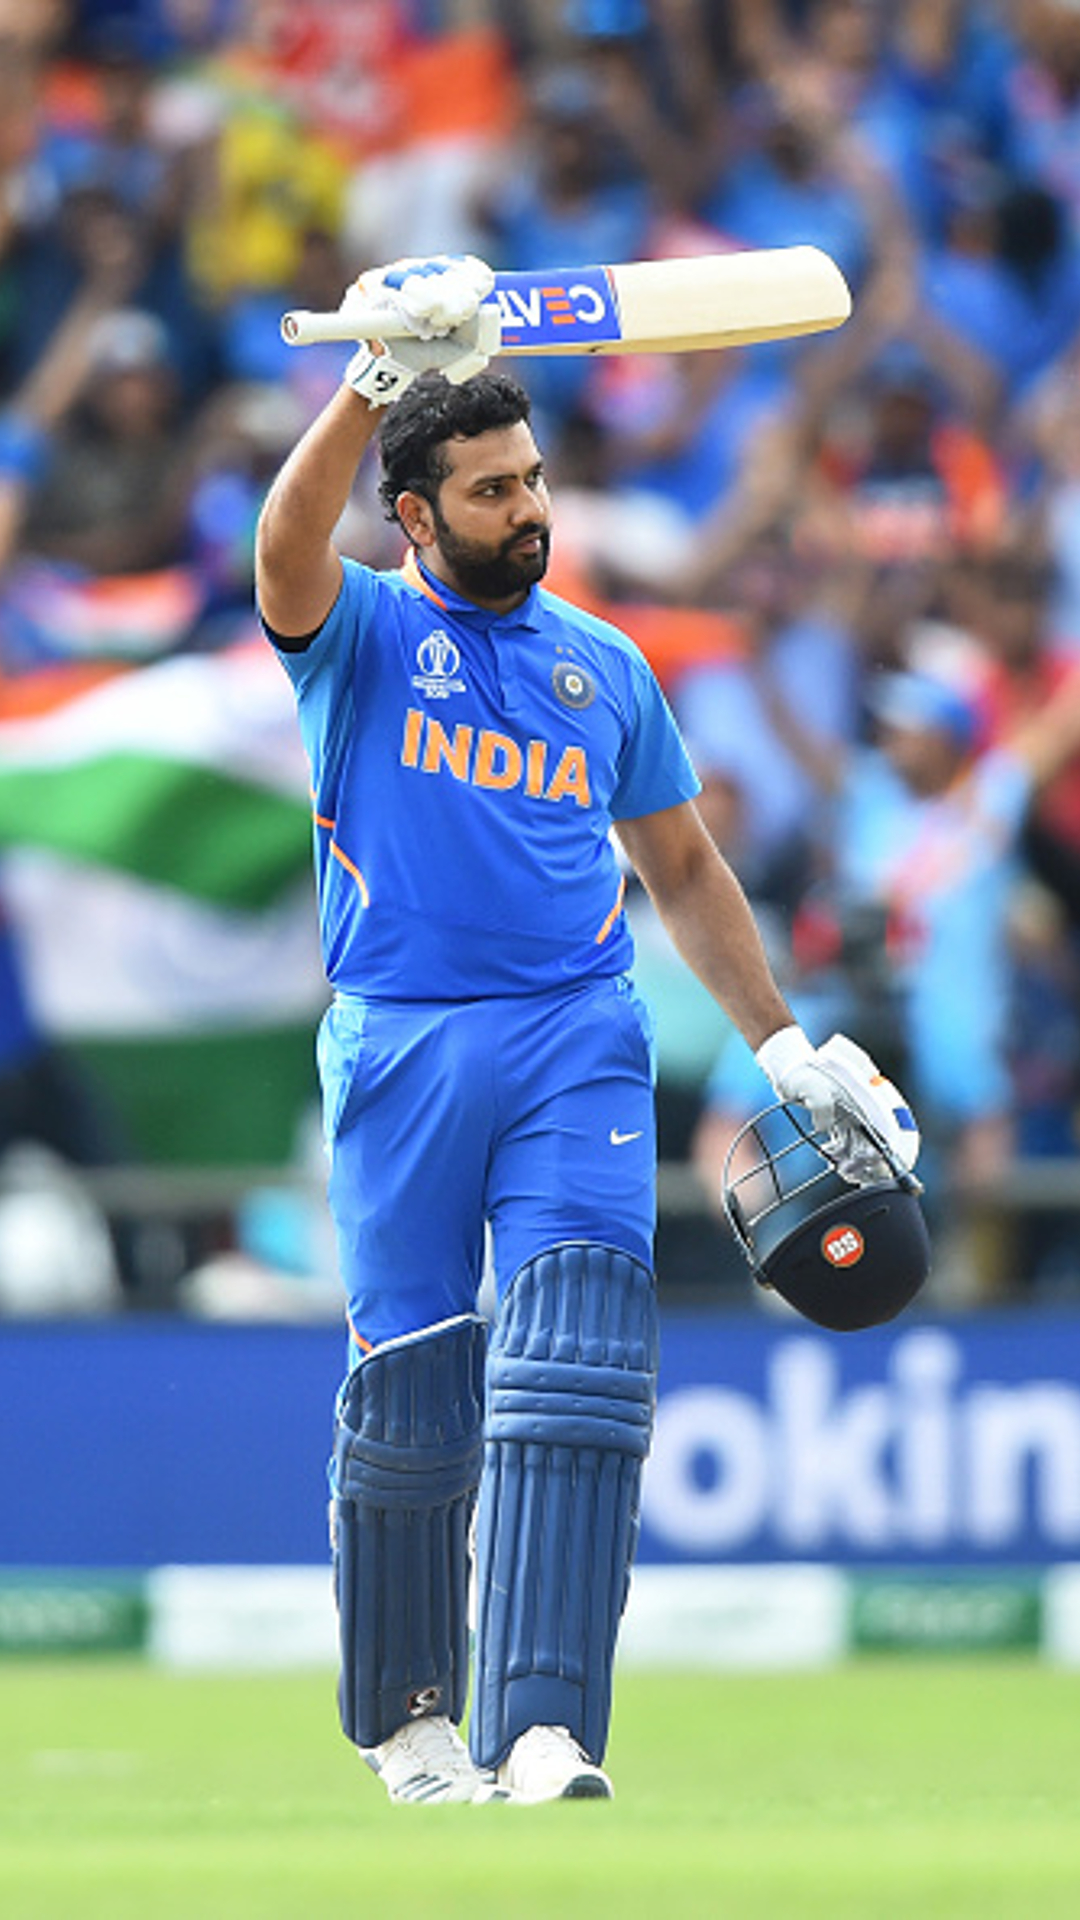 Here is Rohit Sharma's phenomenal chasing record in ODIs since 2021